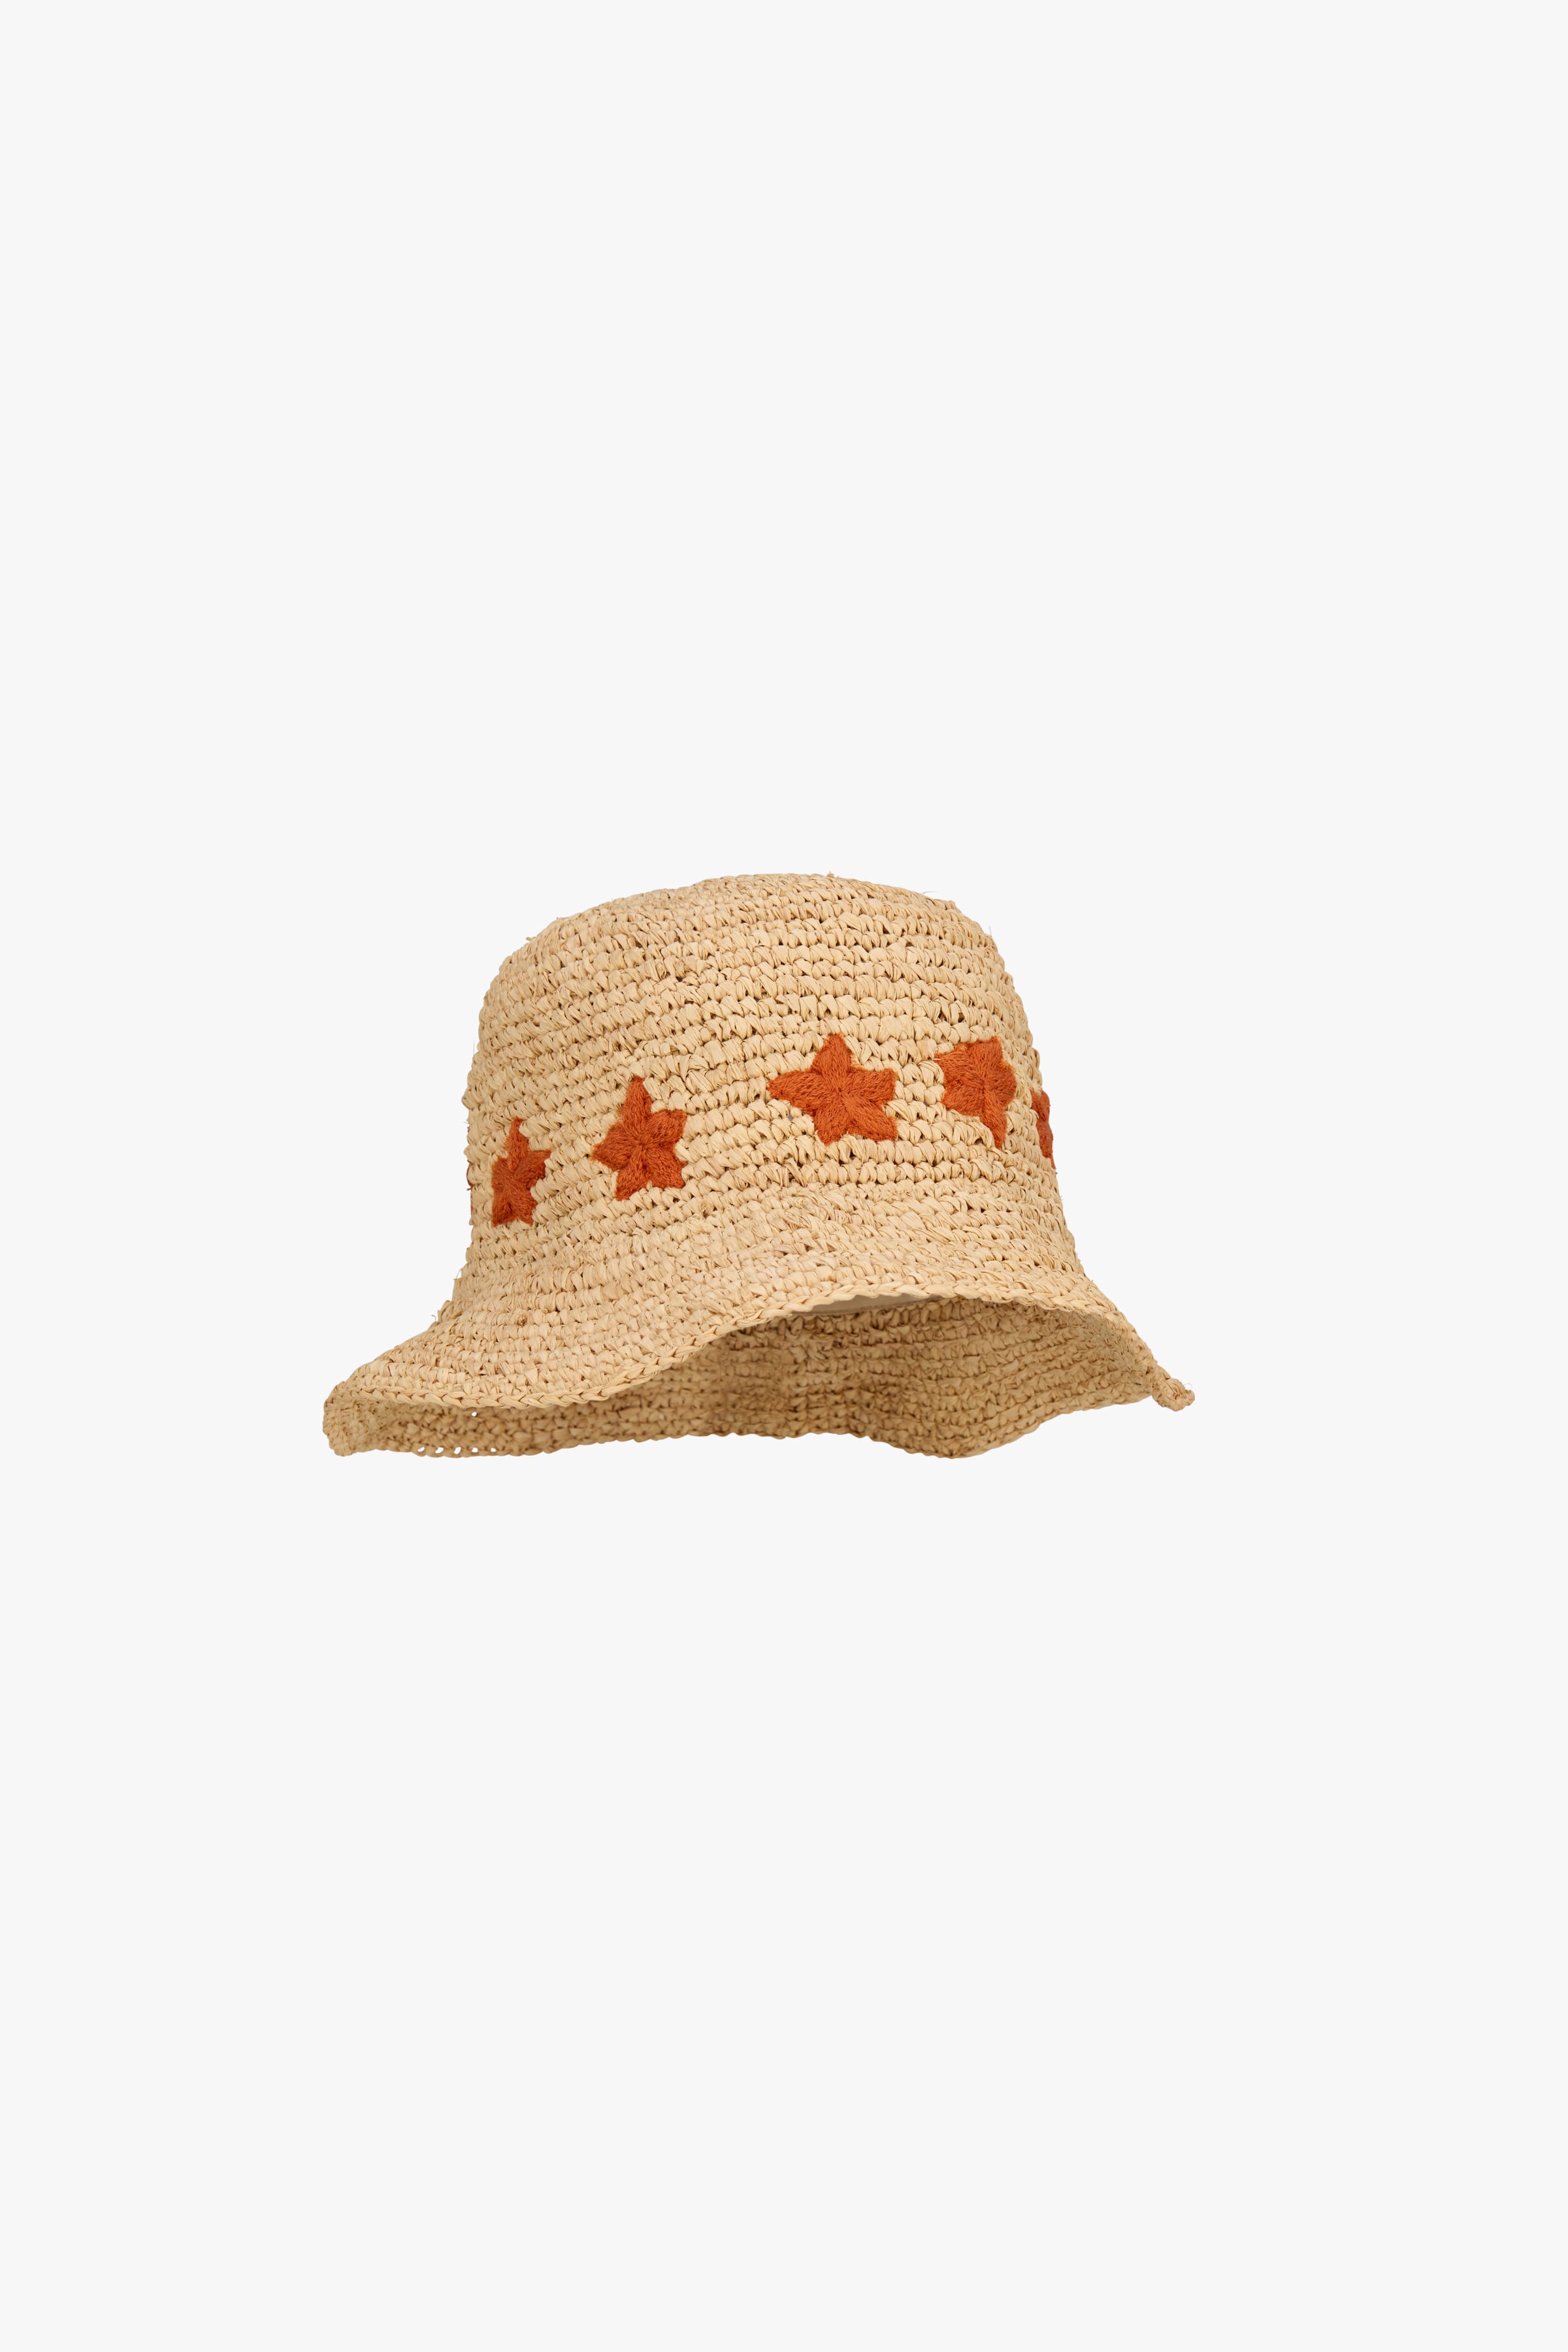 EMBROIDERED STARS RAFFIA HAT LIMITED EDITION